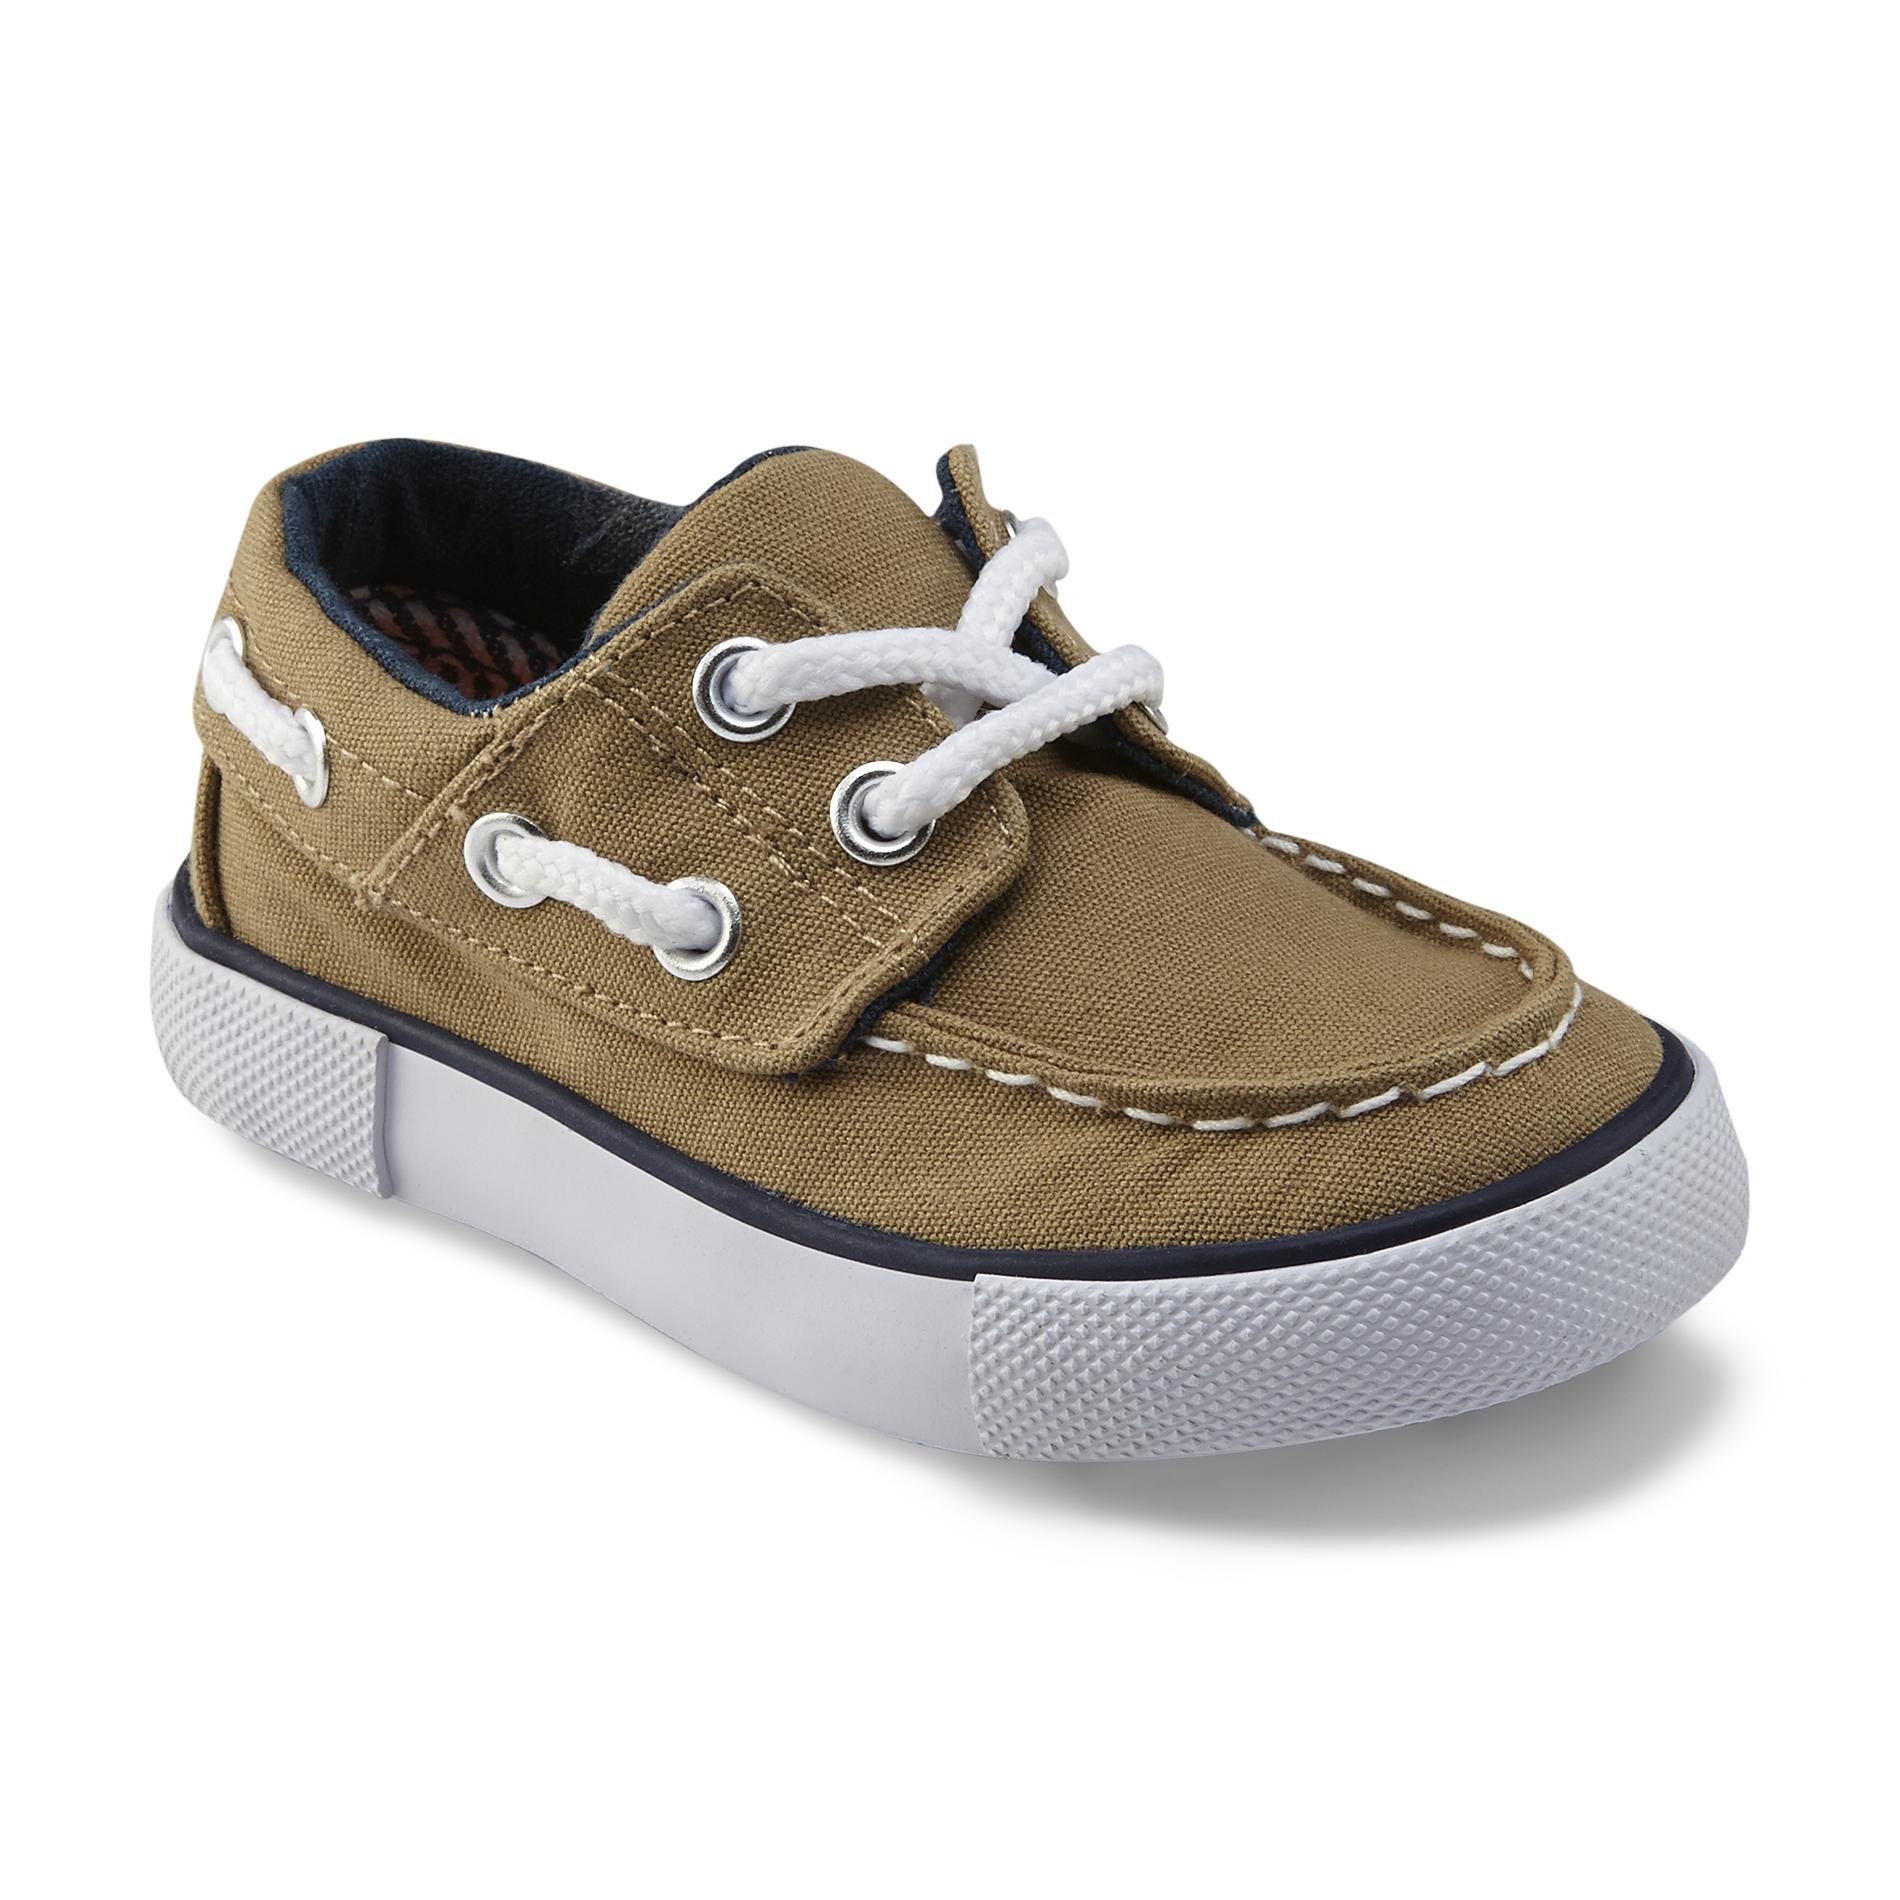 Route 66 Toddler Boy's Maddox Tan Boat Shoe